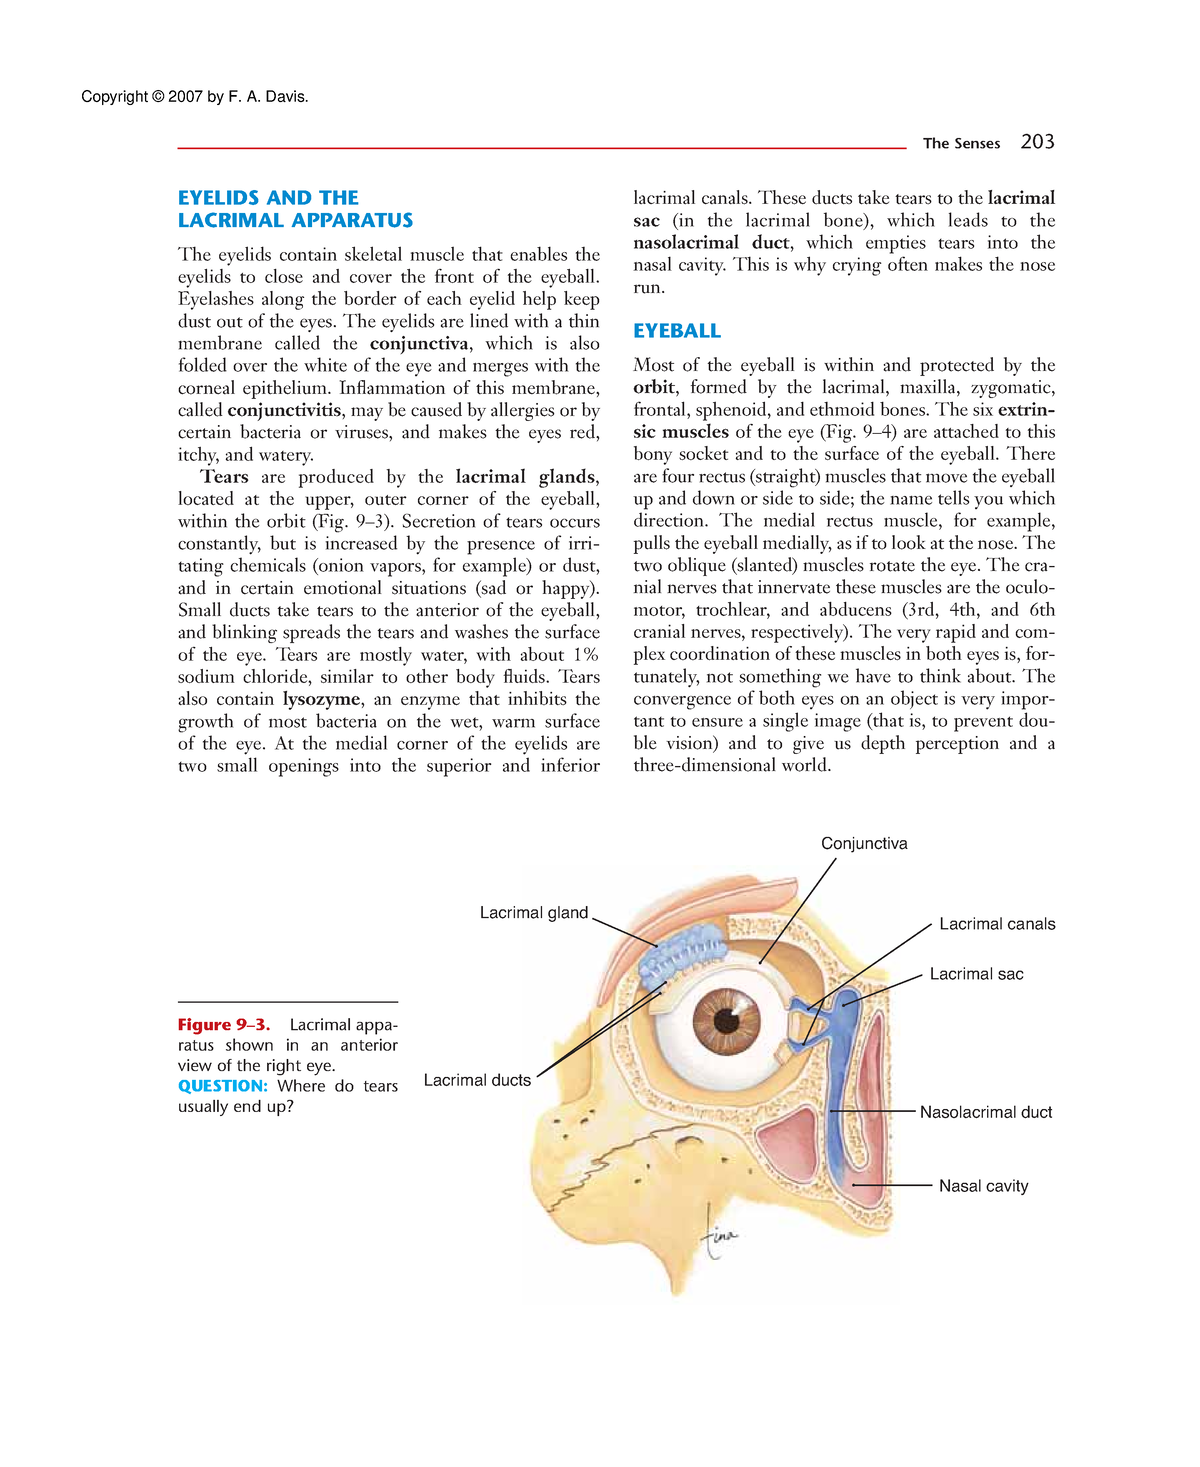 Anatomy And Physiology 23 Eyelids And The Lacrimal Apparatus The Eyelids Contain Skeletal 